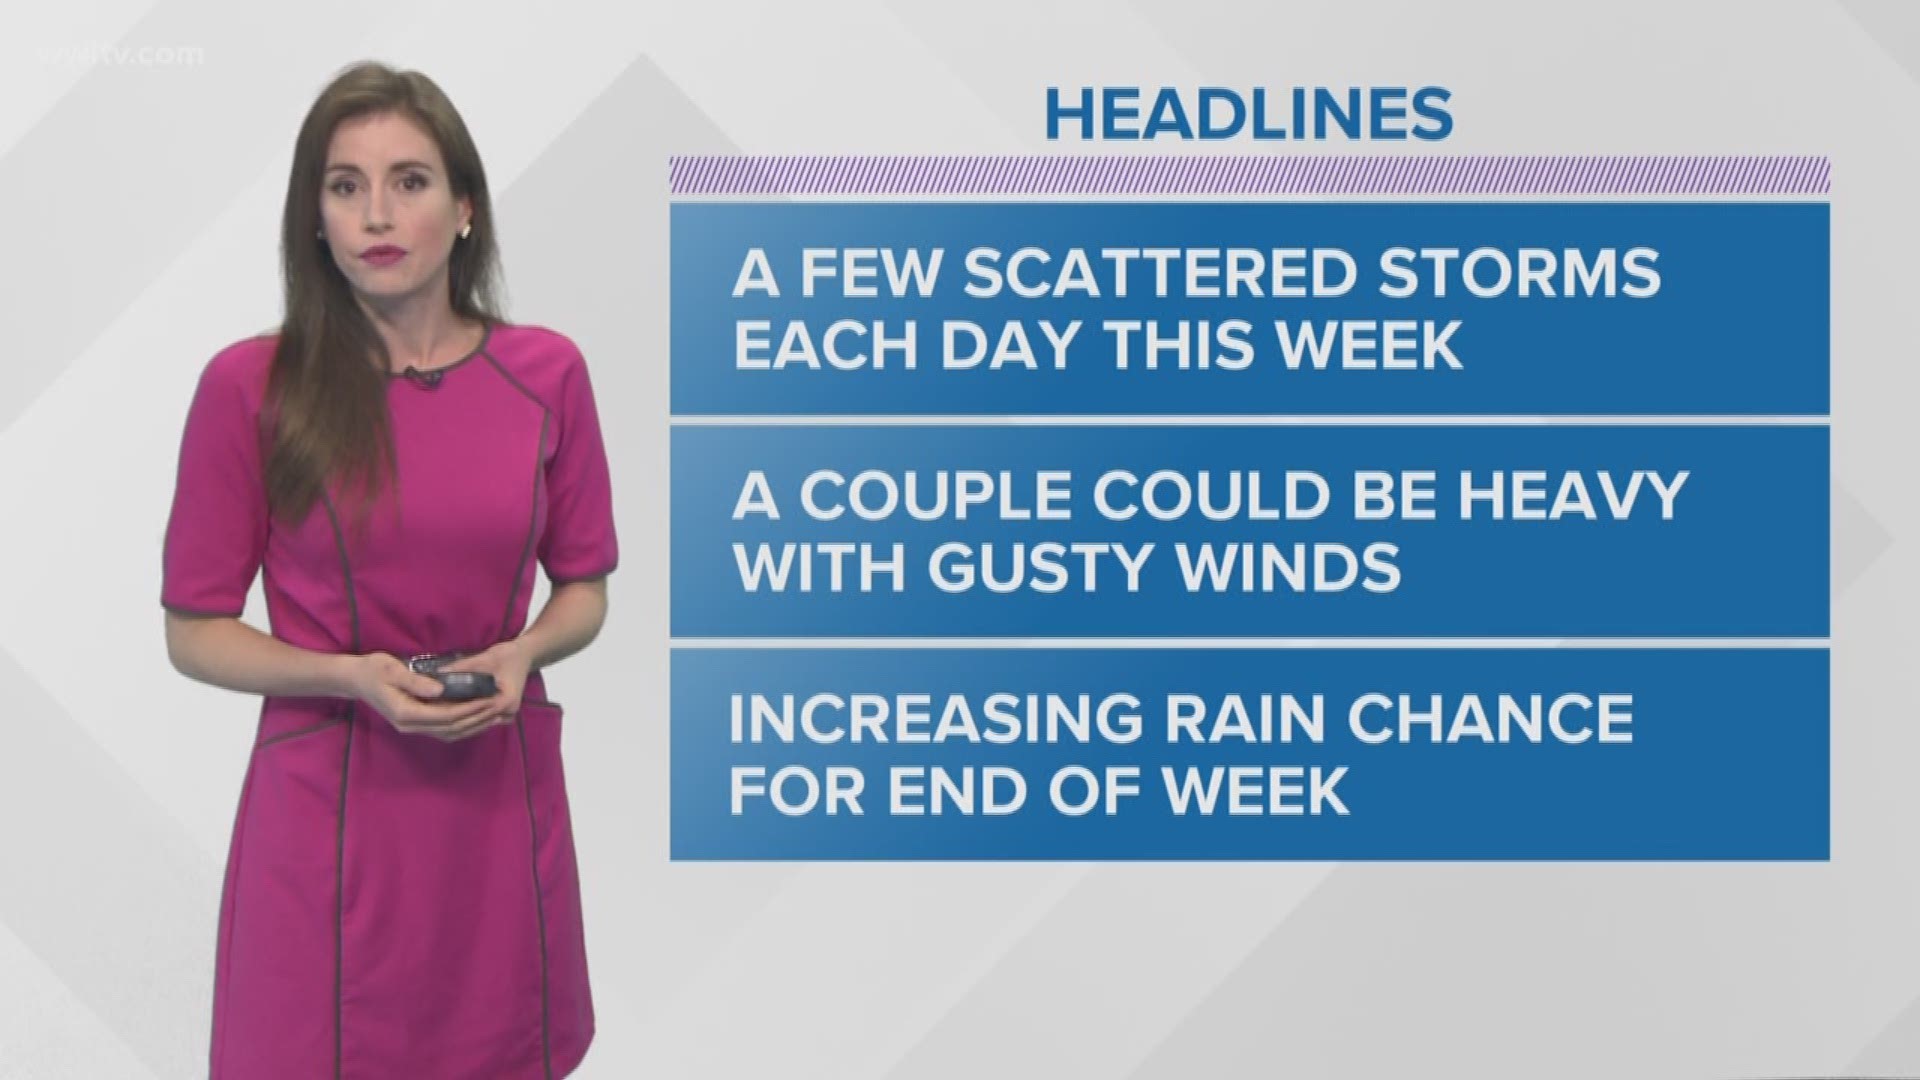 Meteorologist Alexandra Cranford has the forecast at 5:00 p.m. on Saturday, May 19, 2018.